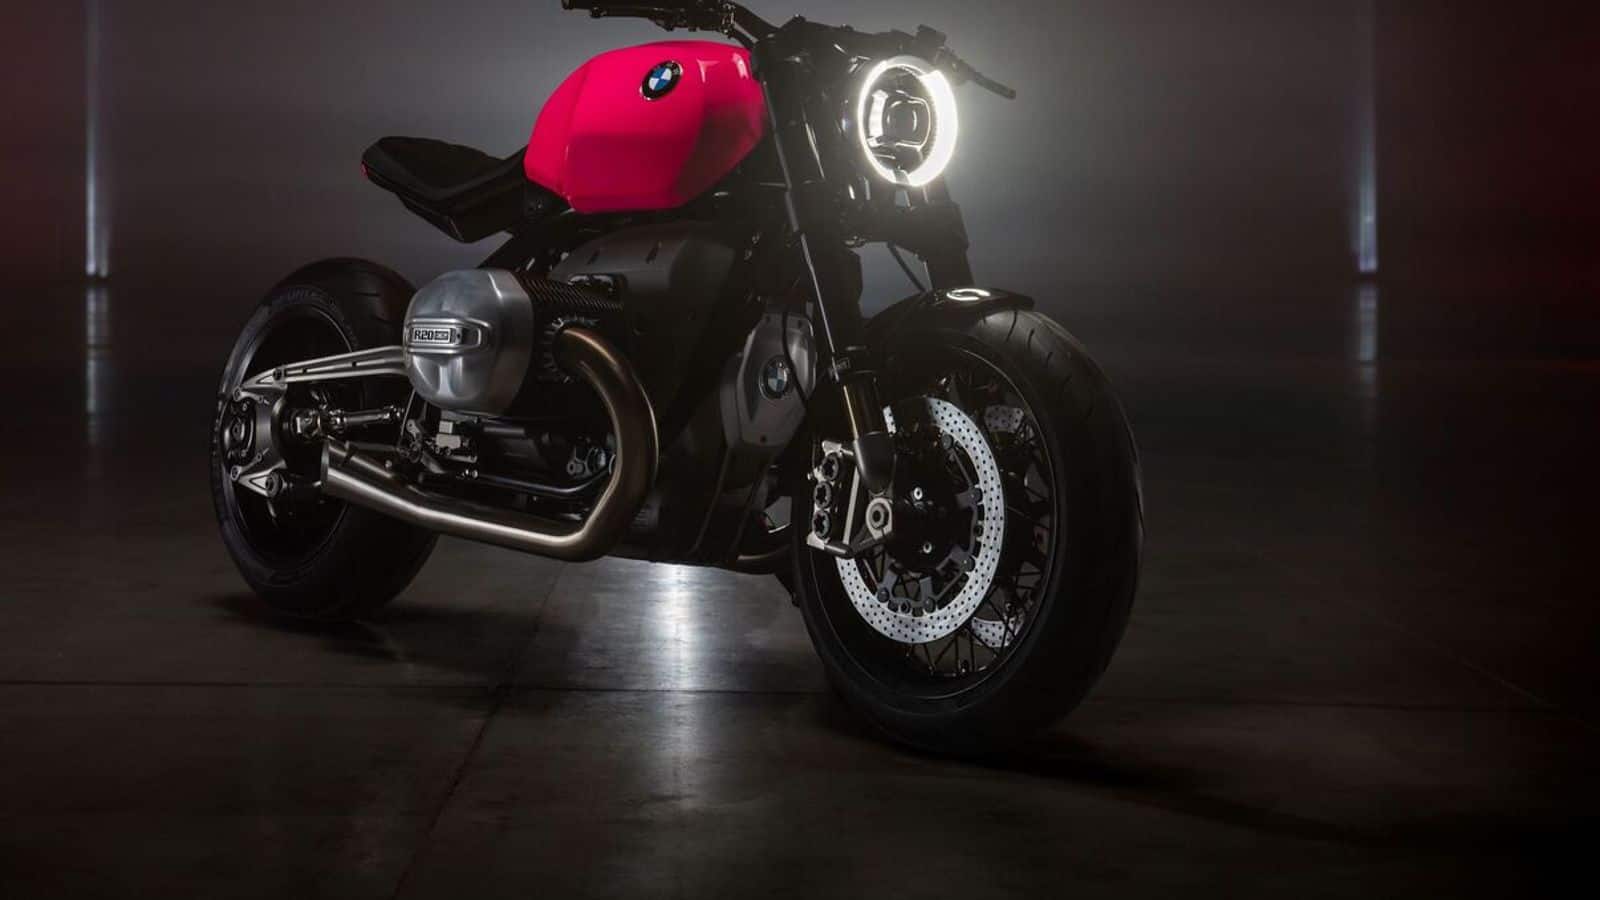 BMW's R20 concept is a modern take on classic motorcycles